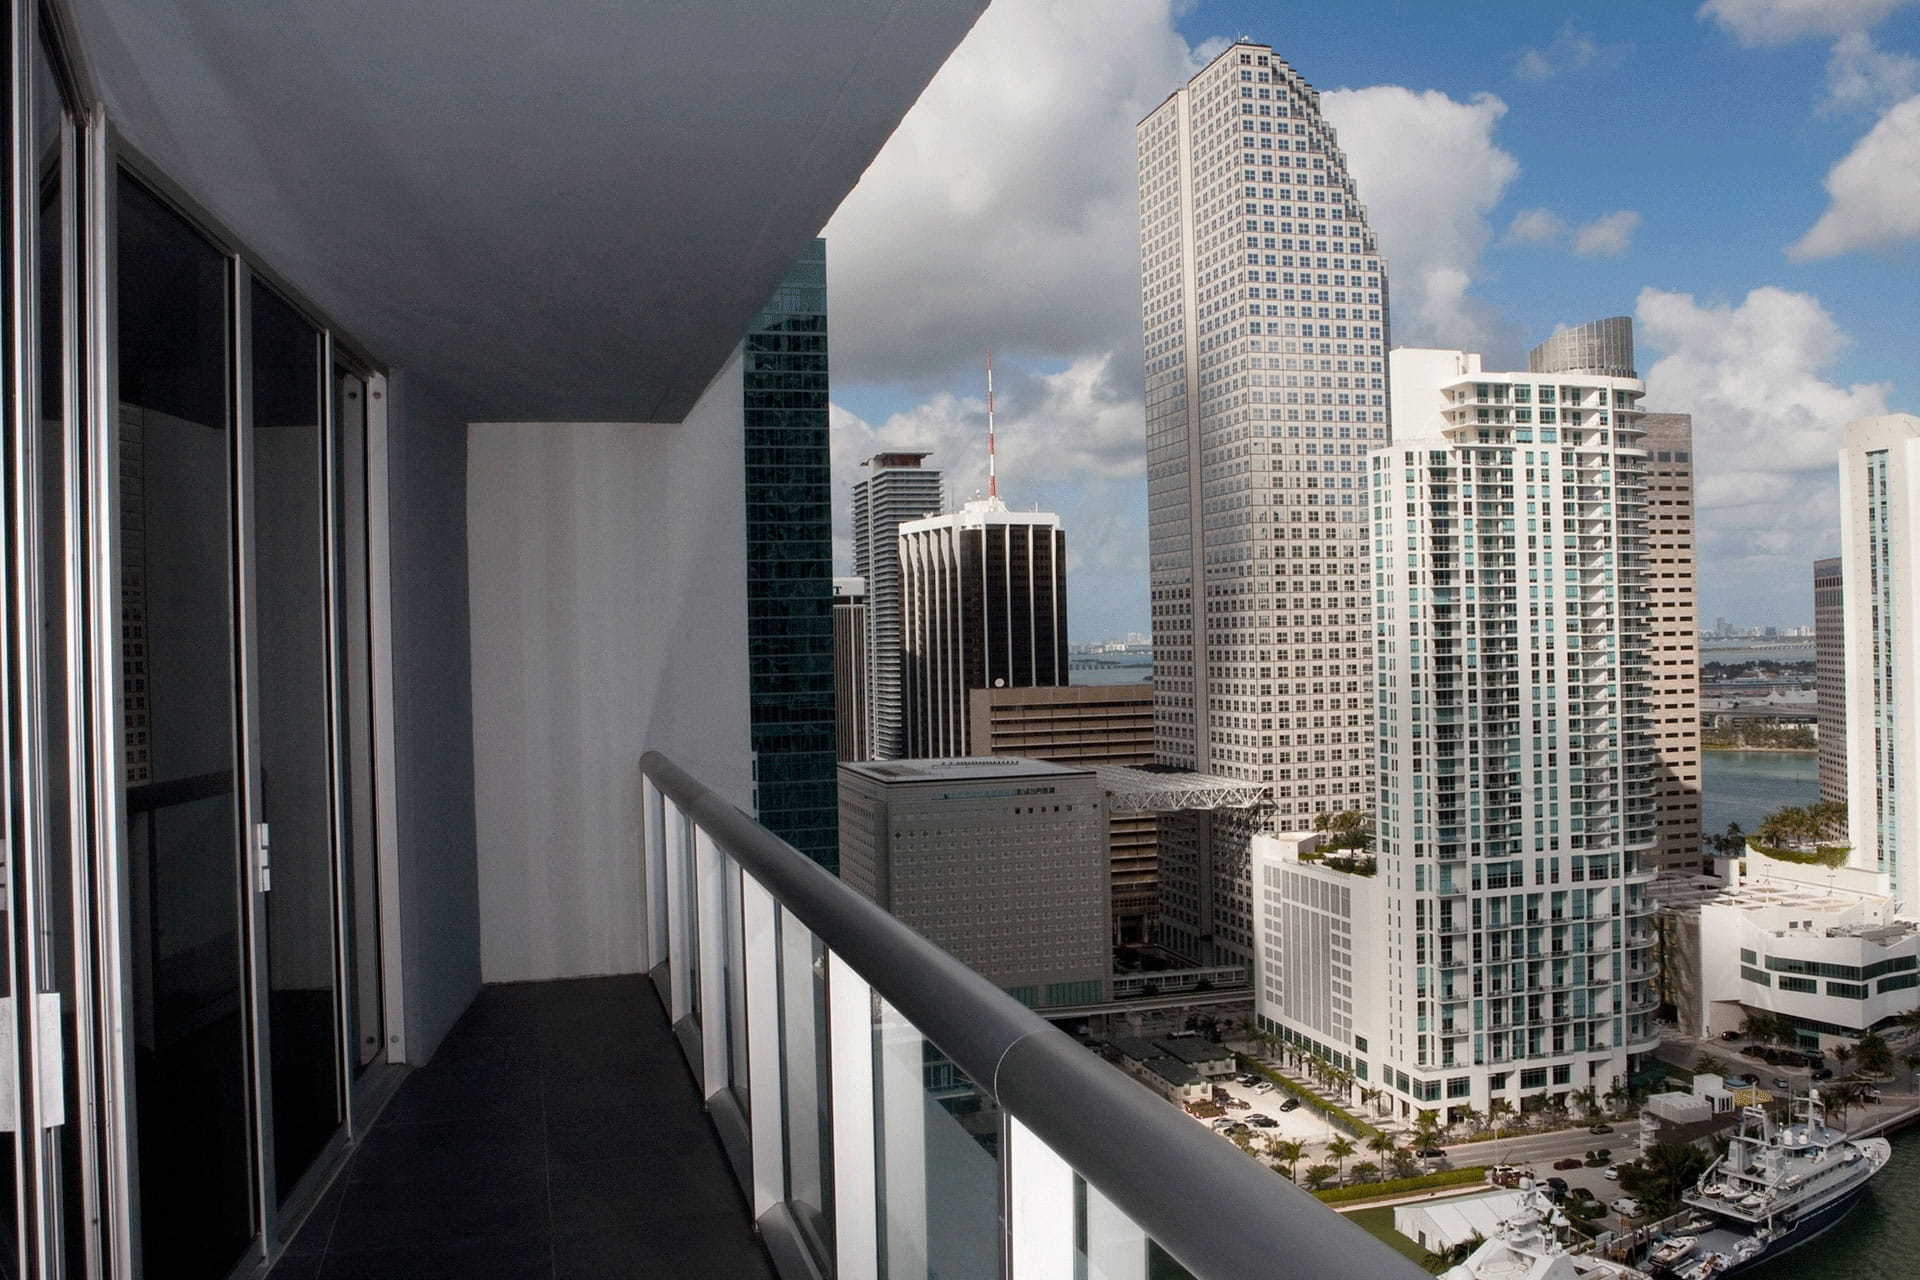 View from Hotel, Miami